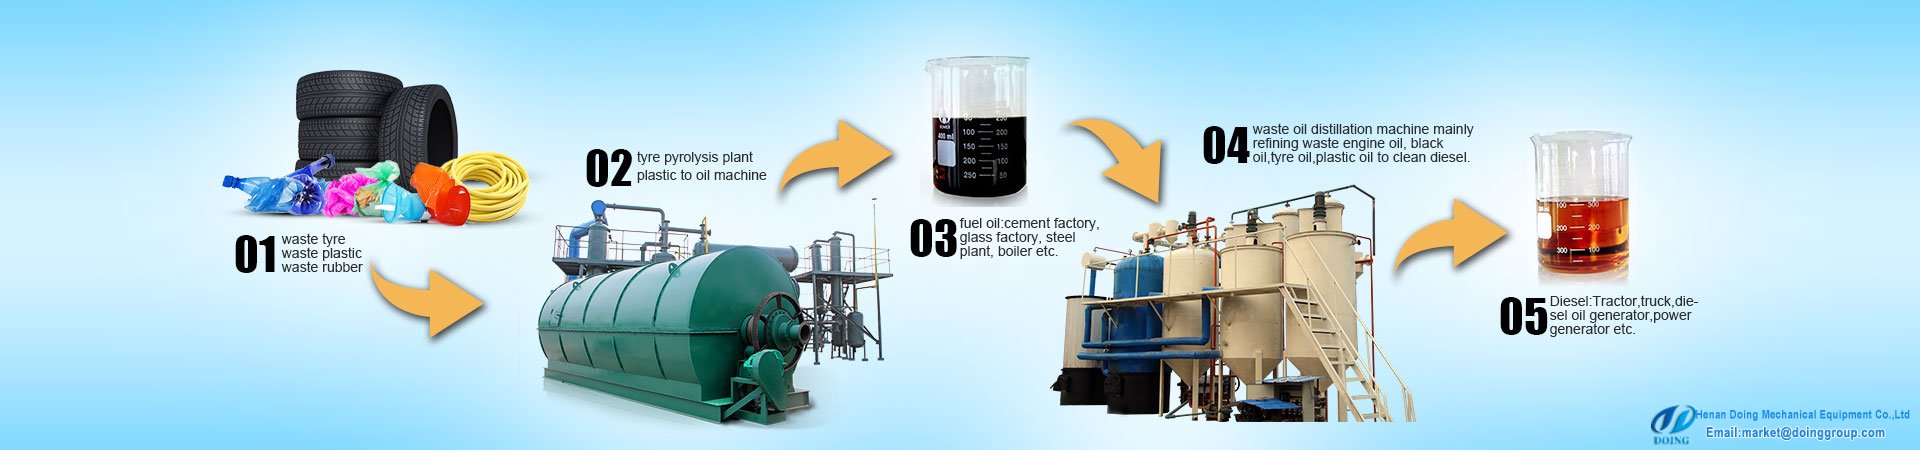 Waste recycling pyrolysis plant